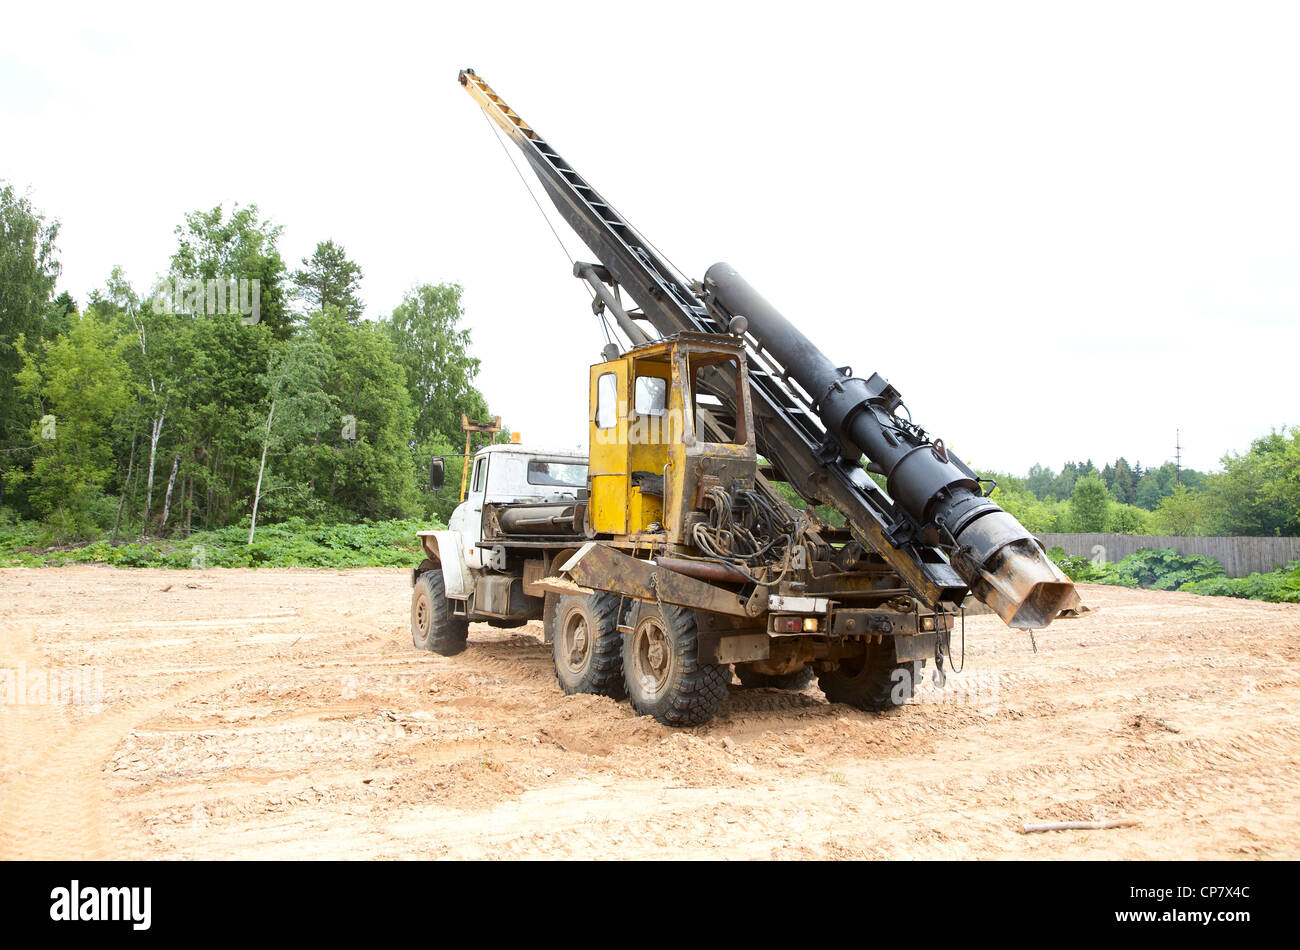 pile driver performs work Stock Photo